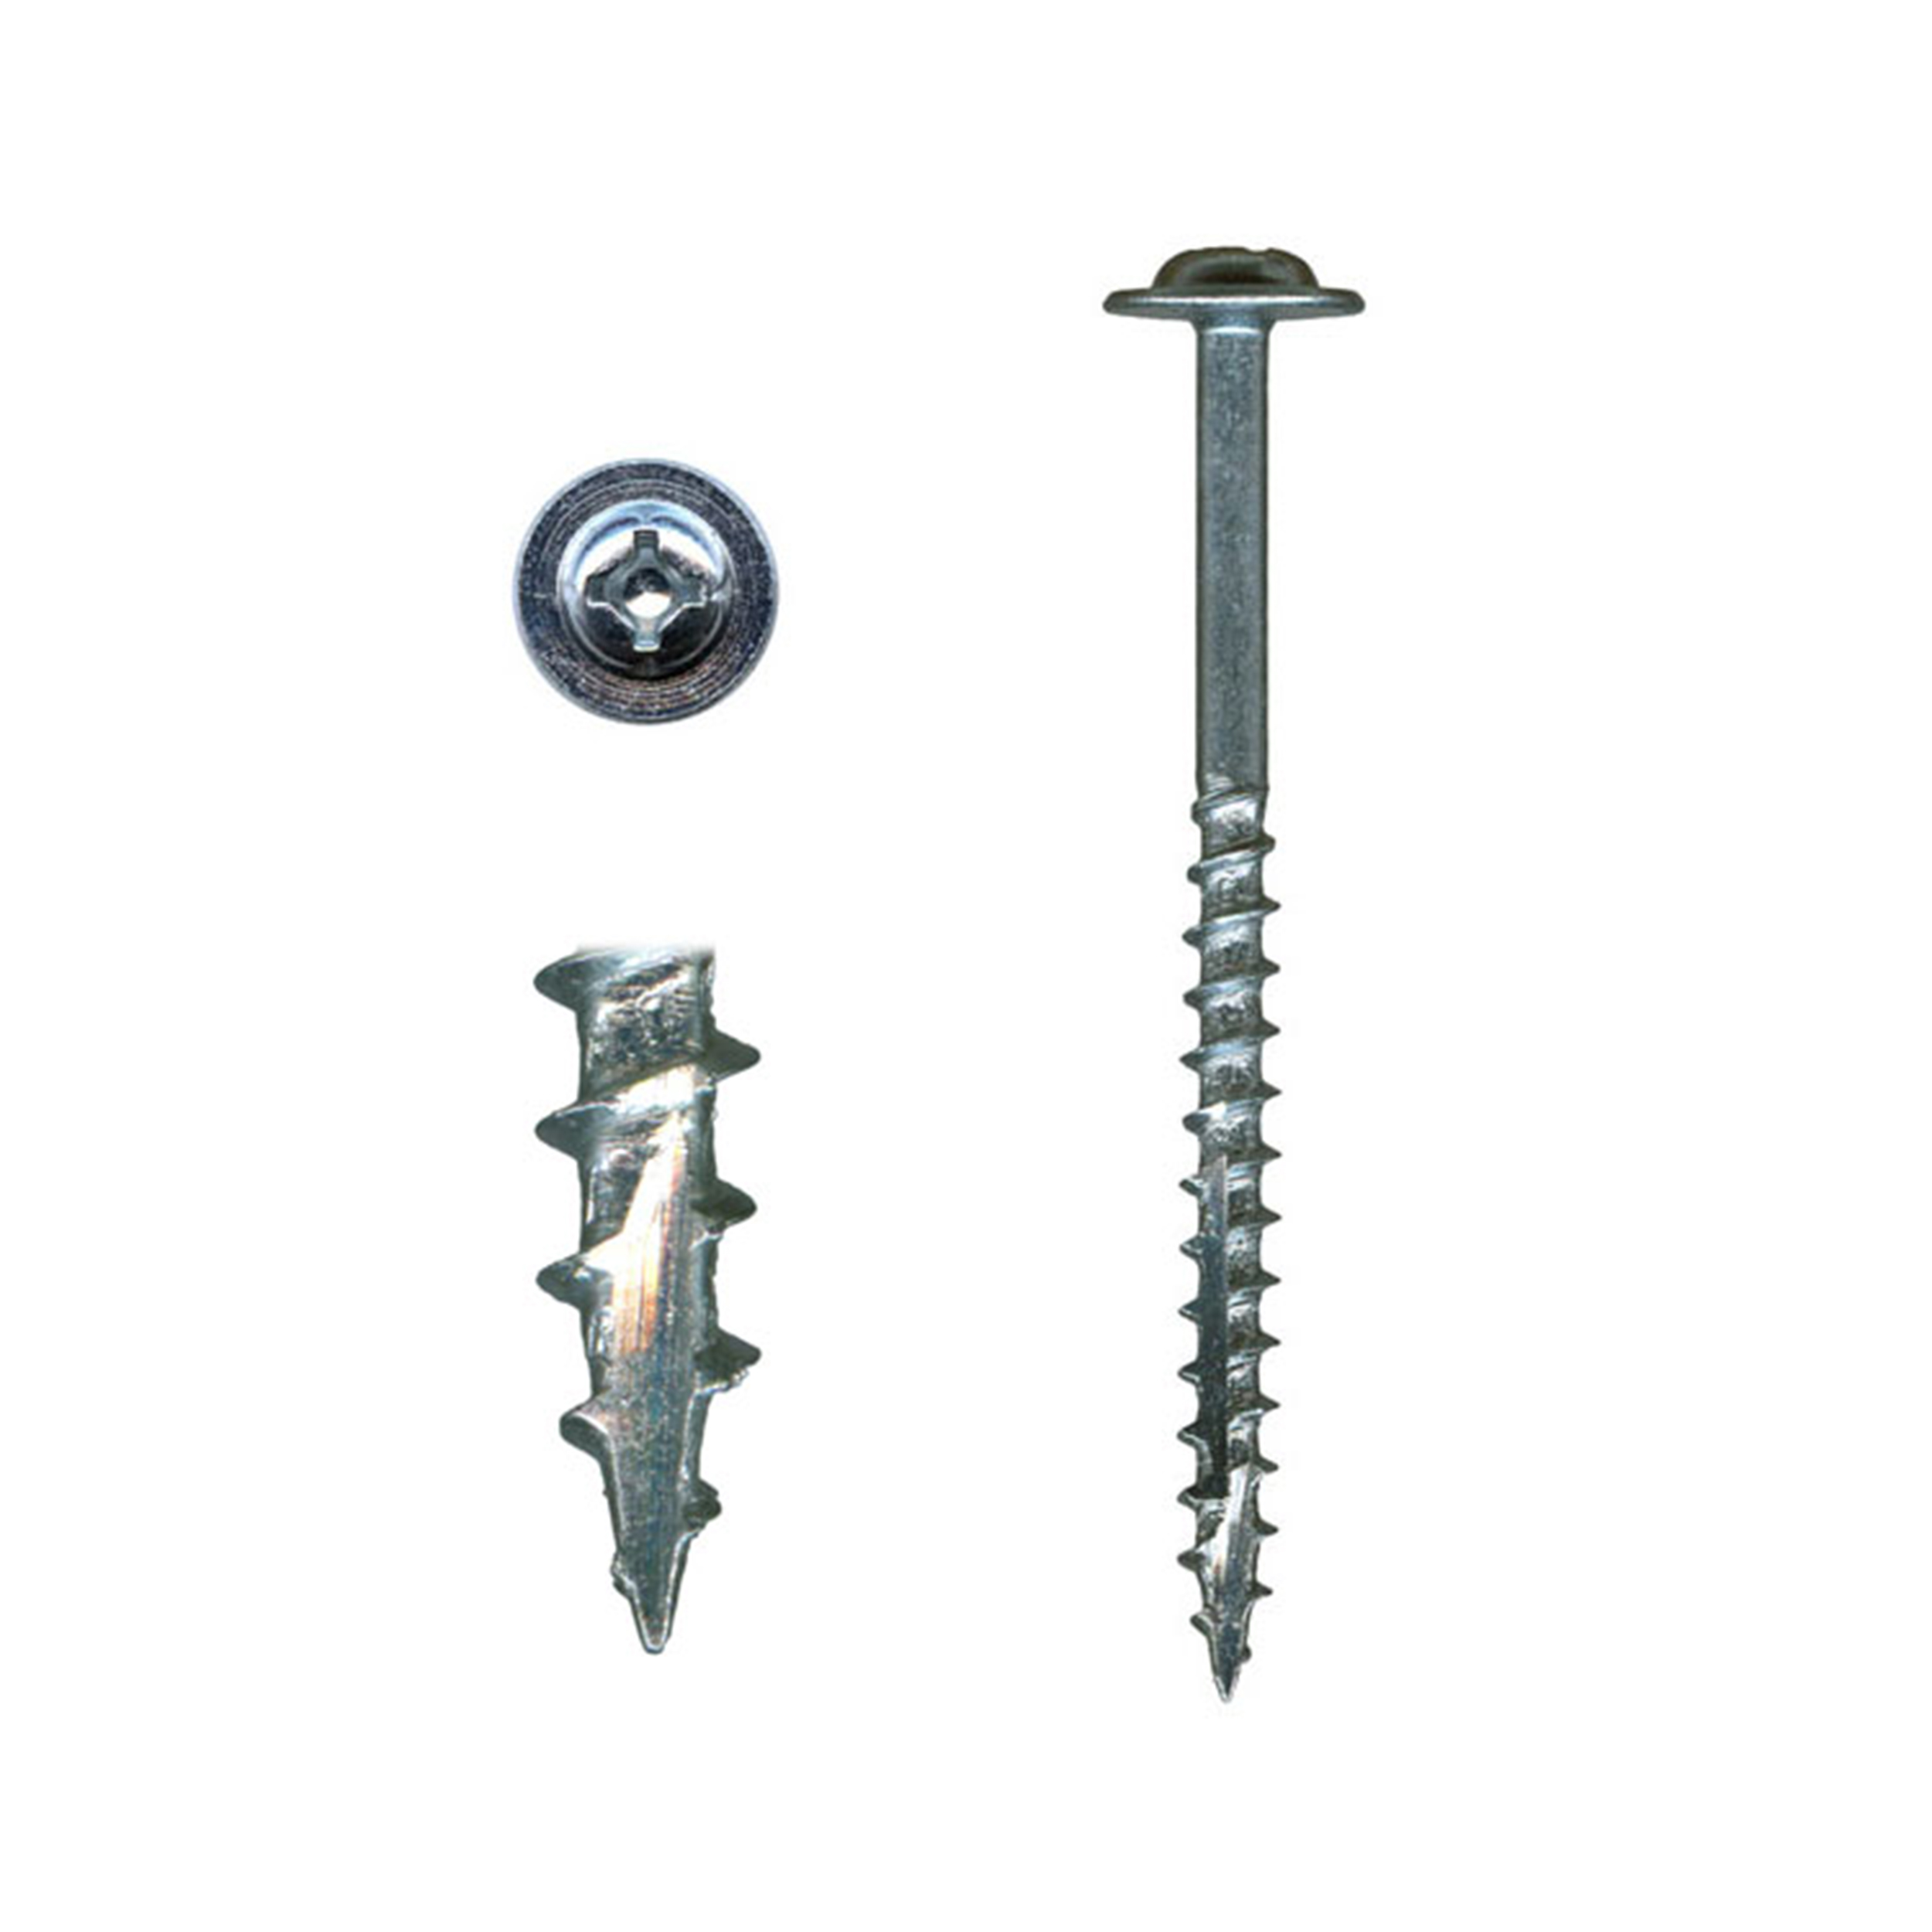 10 X 3 Cabinet Installation Screws, Washer Head, Combo Drive, Zinc With White Painted Head, 100-piece